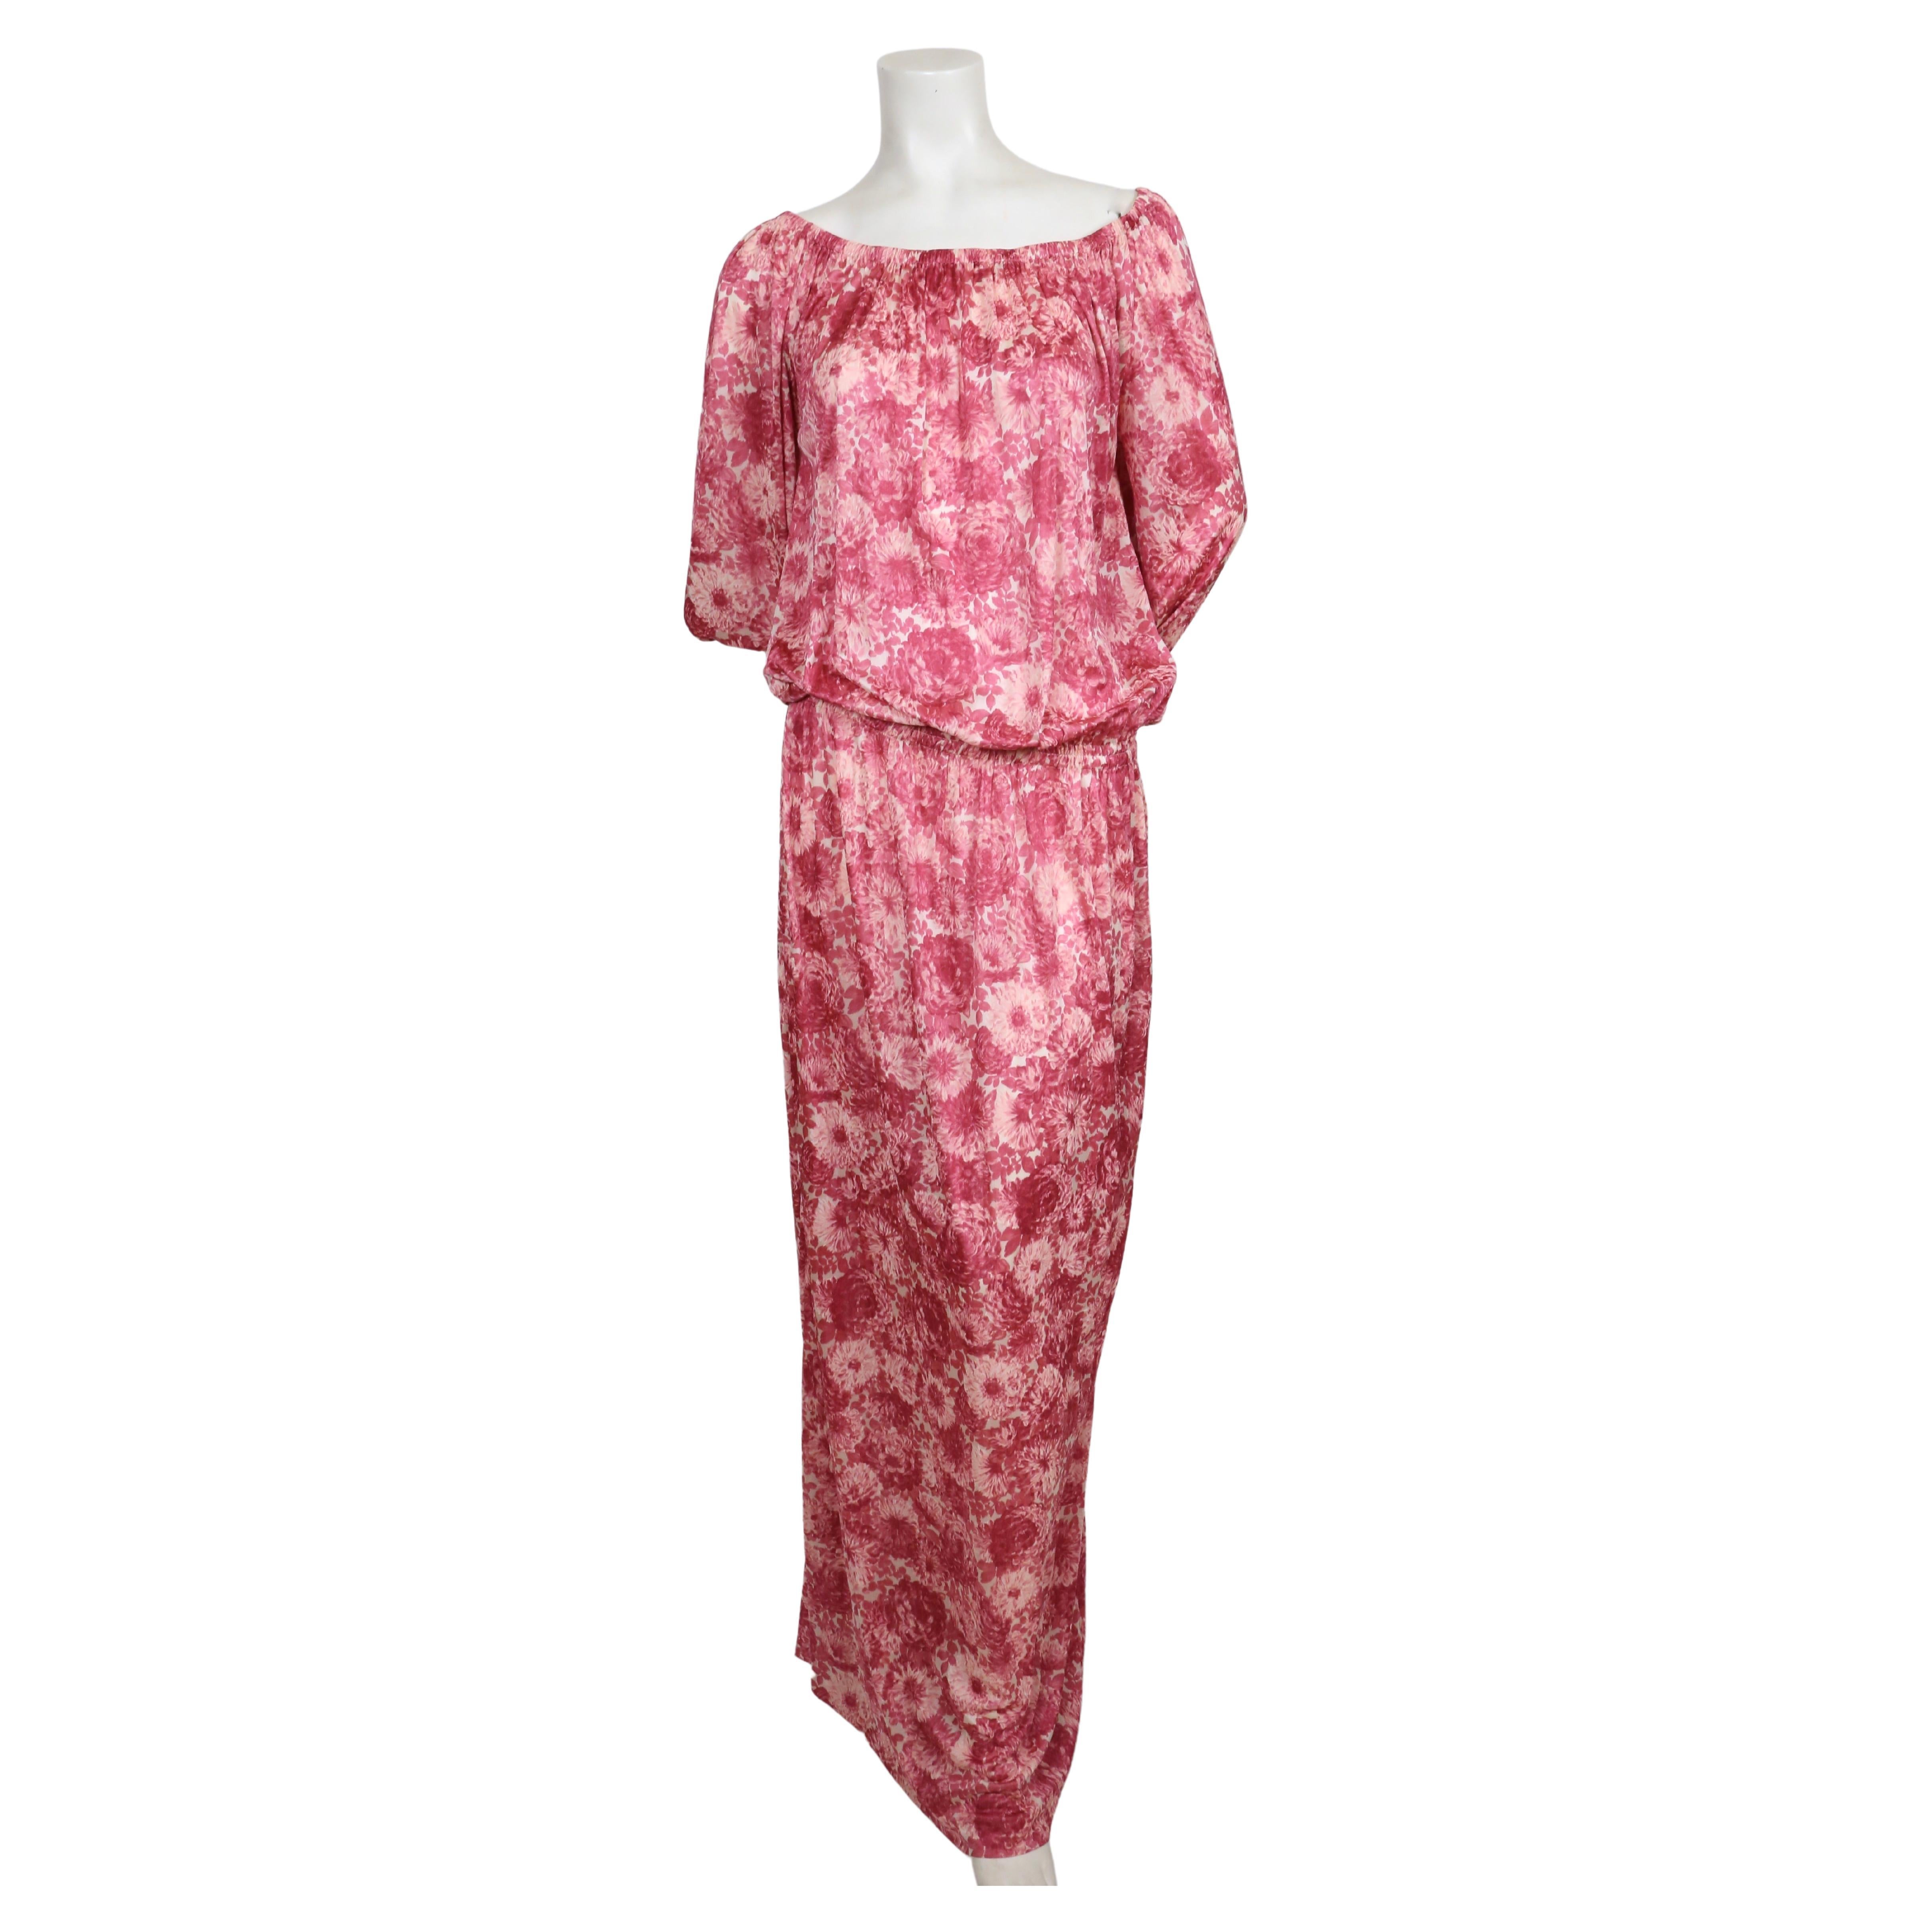 1970's YVES SAINT LAURENT floral printed silk jersey dress In Good Condition For Sale In San Fransisco, CA